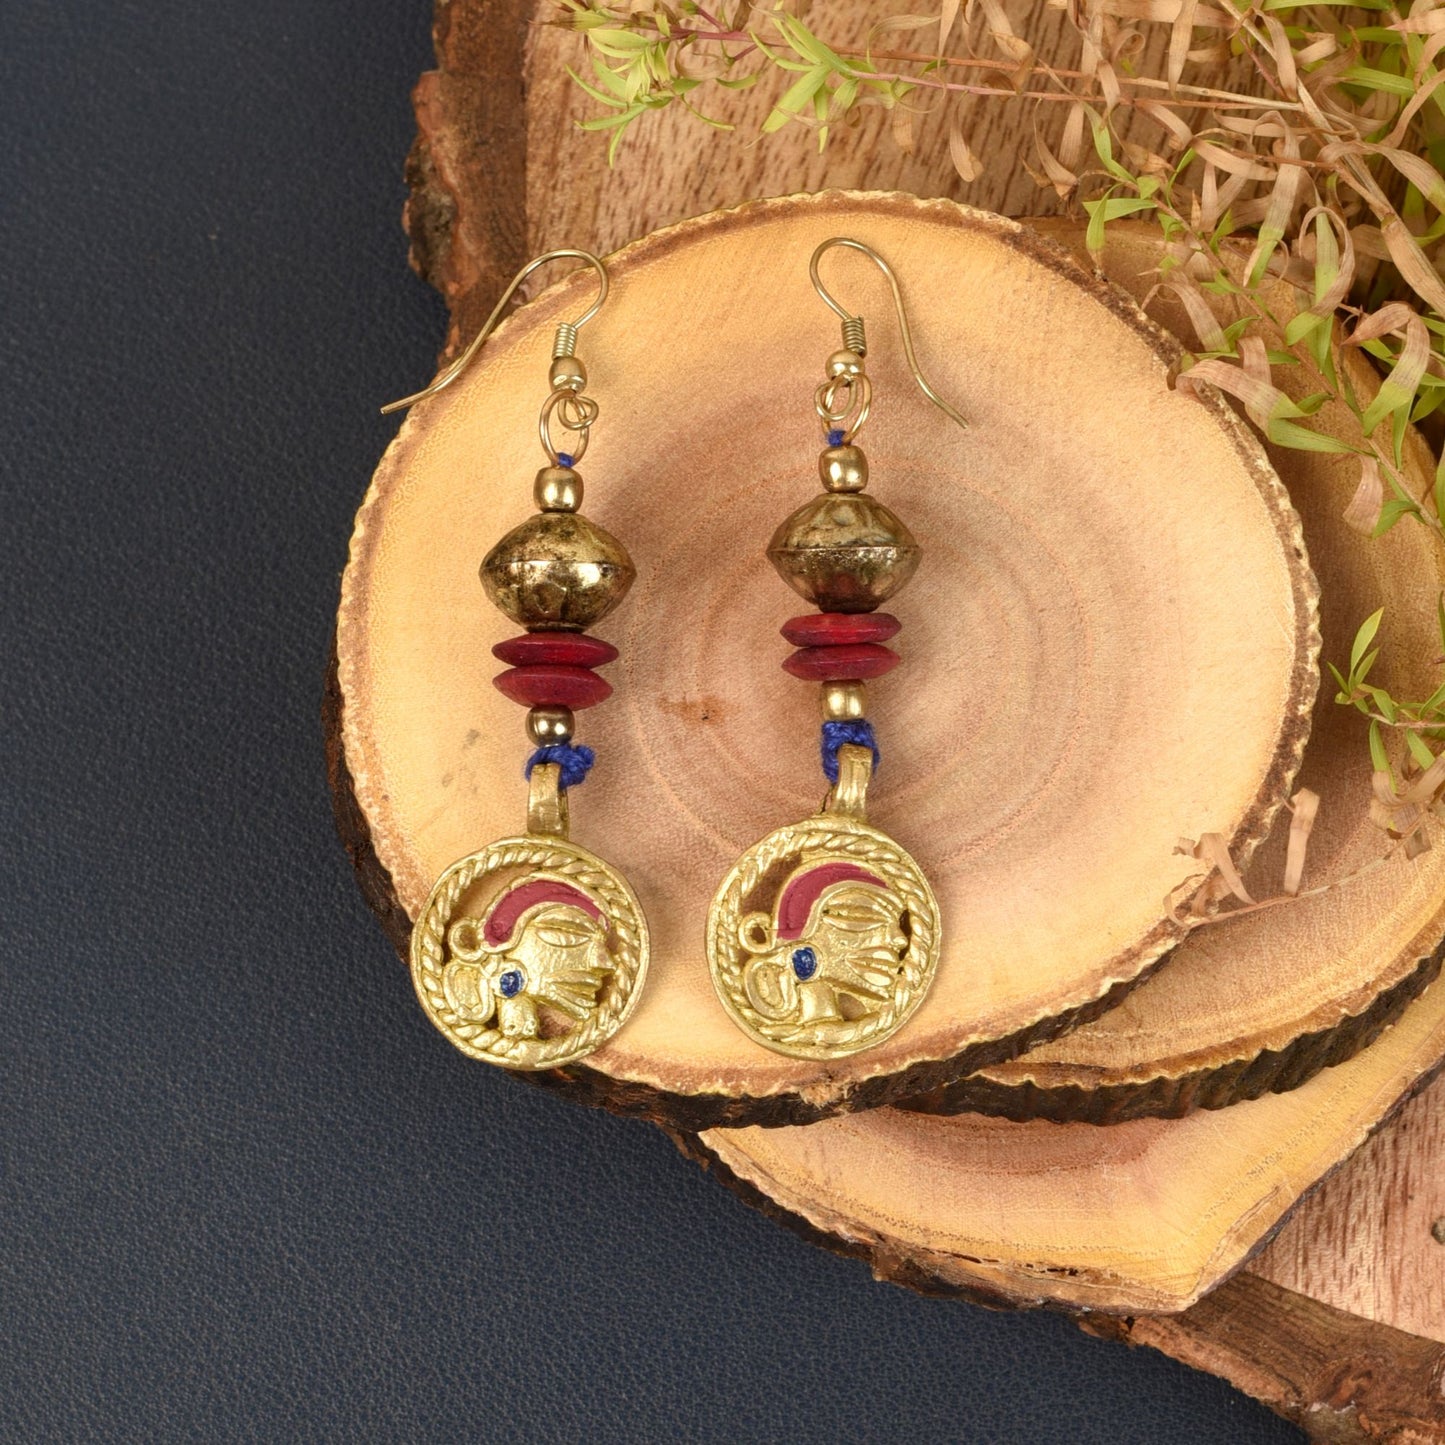 The Queens Circle Handcrafted Tribal Earrings